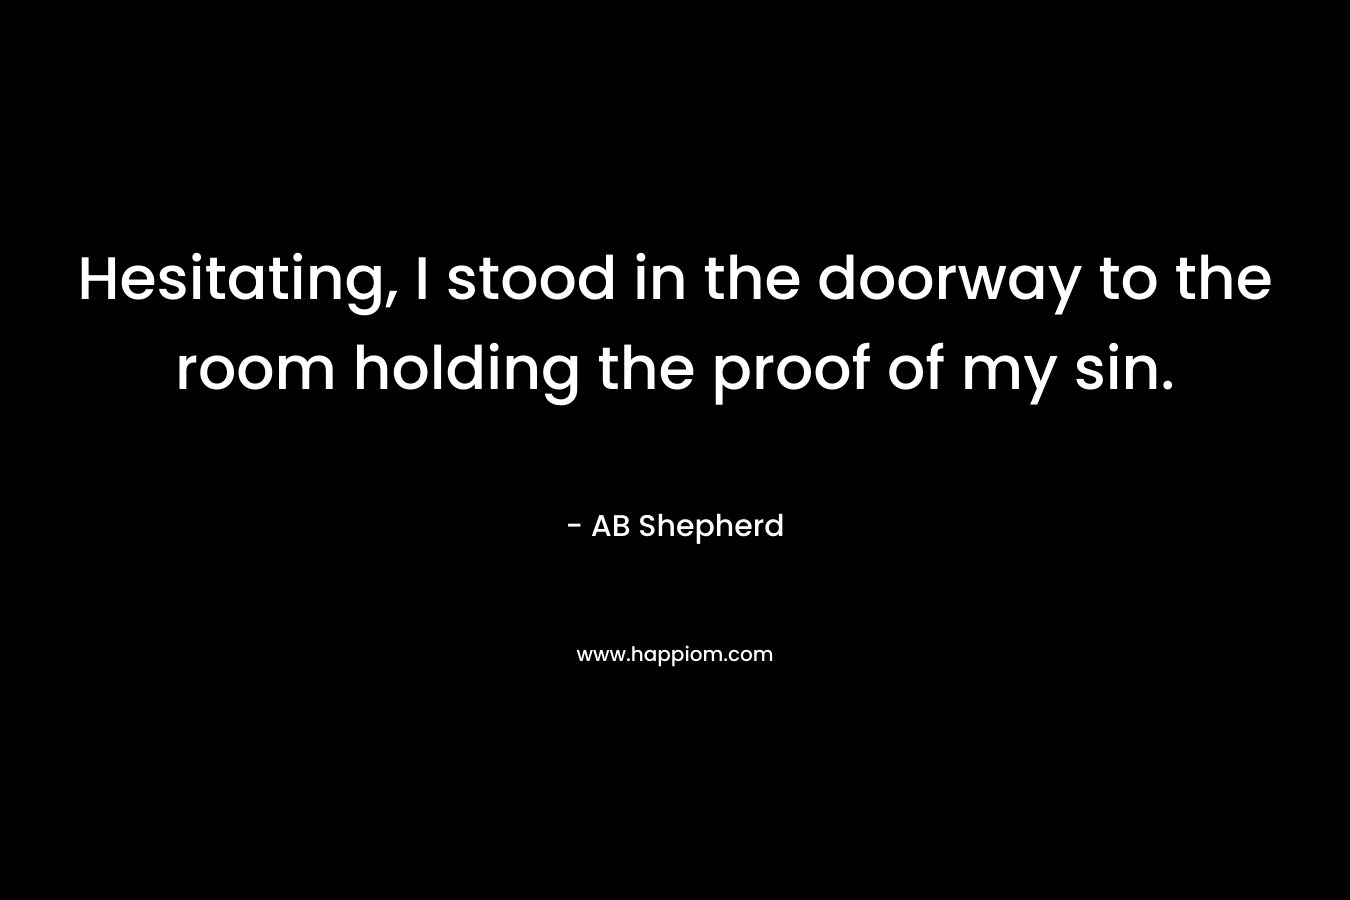 Hesitating, I stood in the doorway to the room holding the proof of my sin. – AB Shepherd